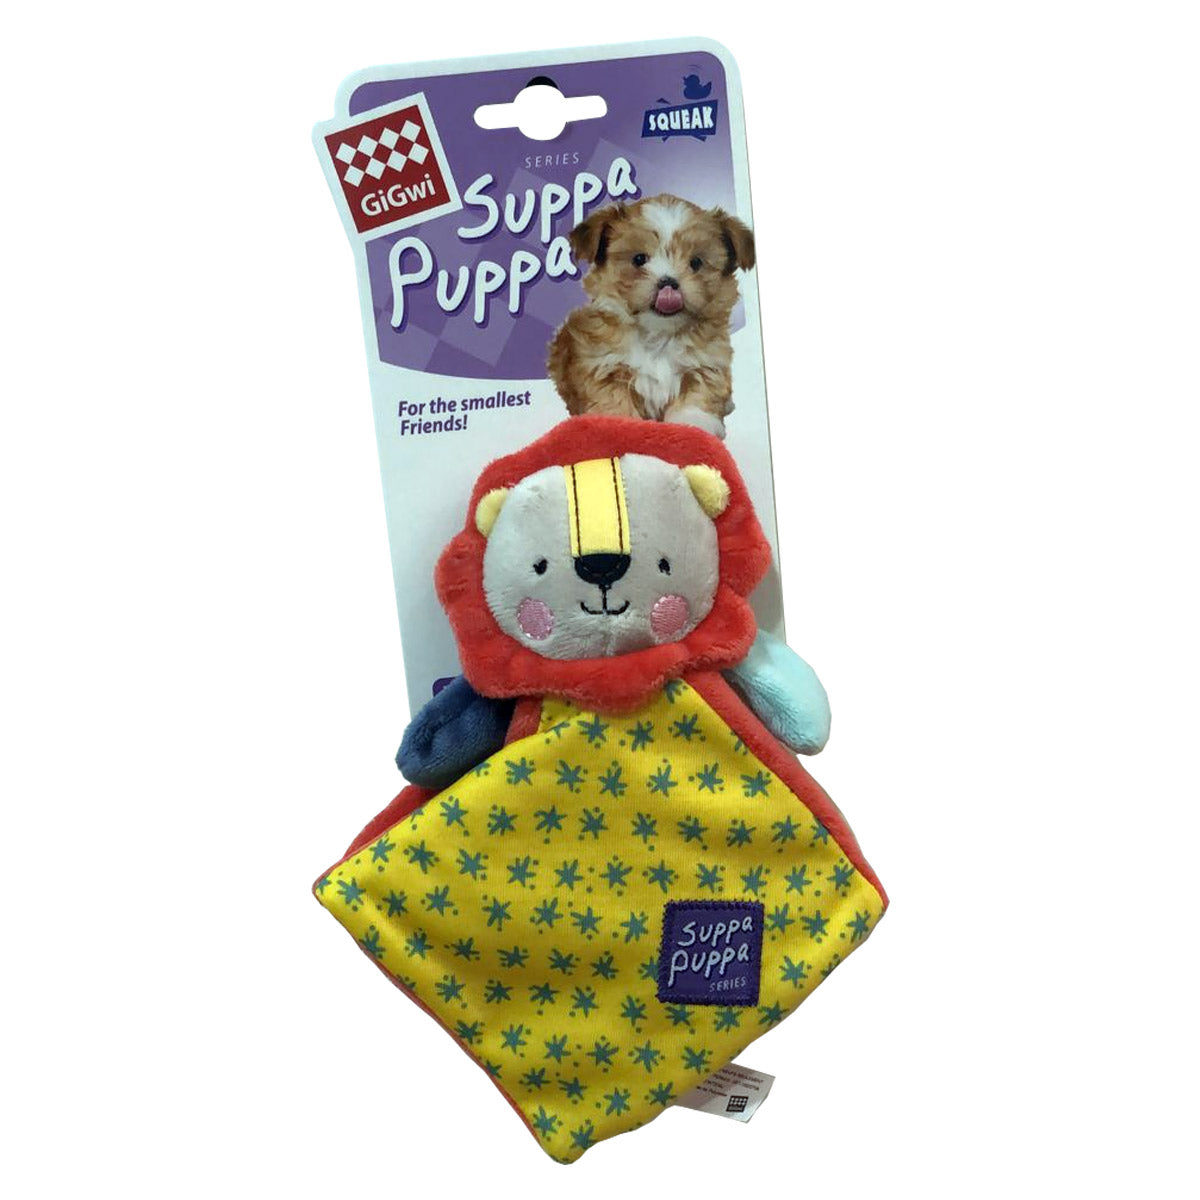 Gigwi Suppa Puppa Lion with Squeaker & Crinkle XS